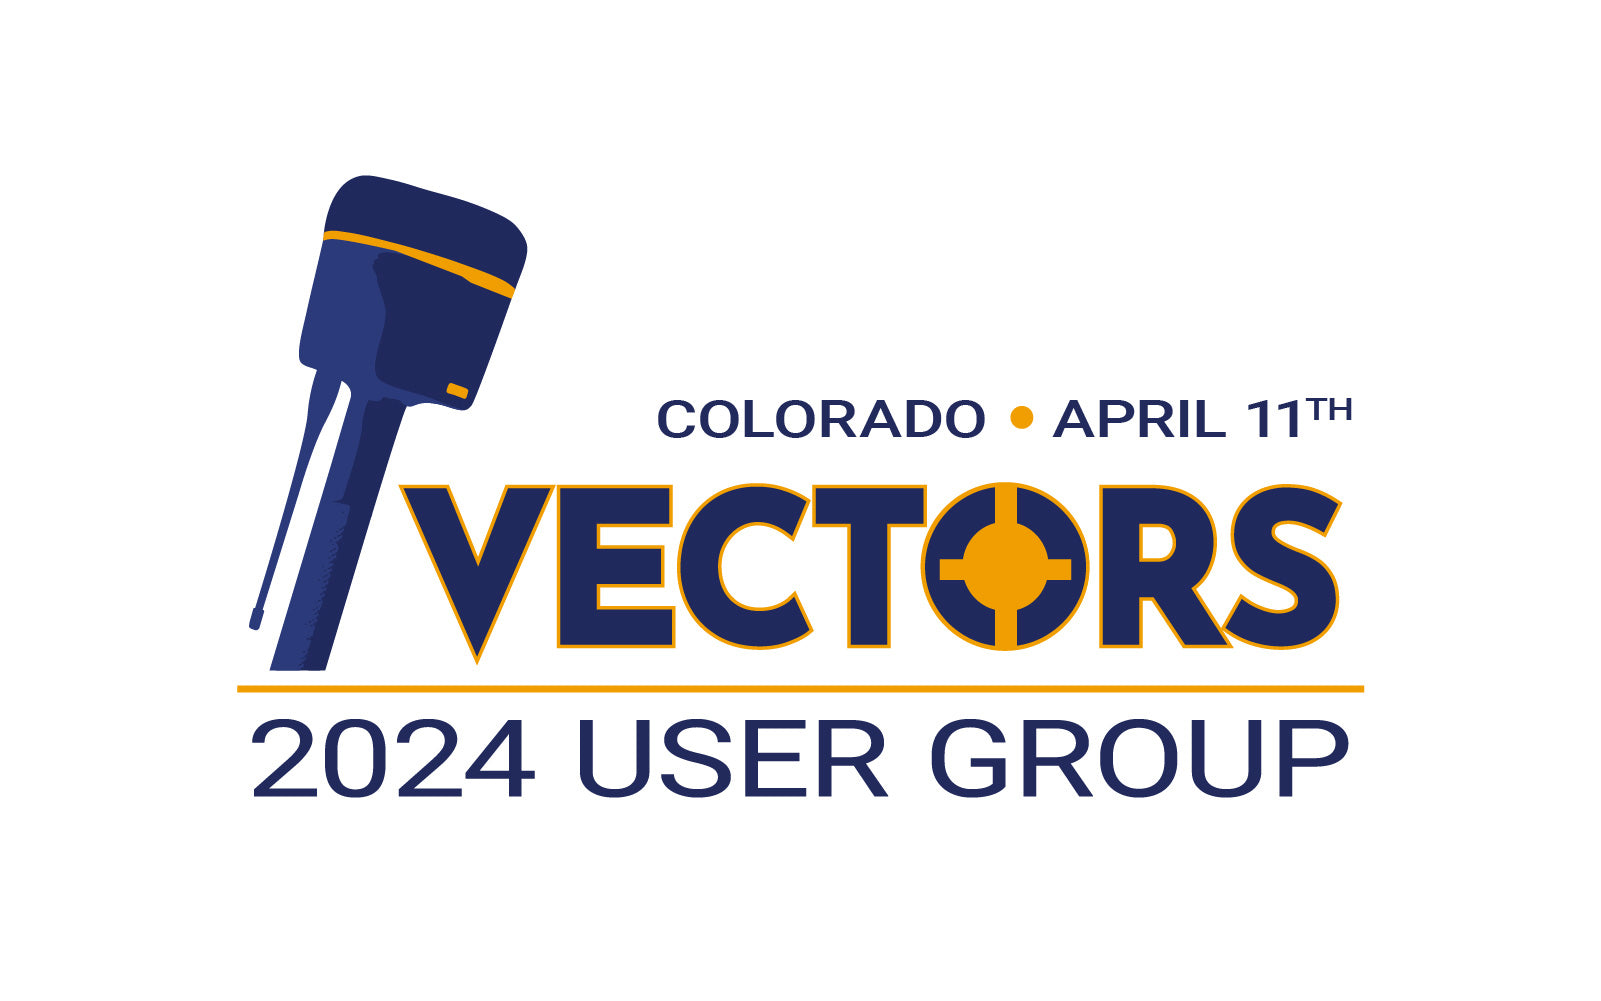 Vectors User Group Entry Fee (1 Seat)